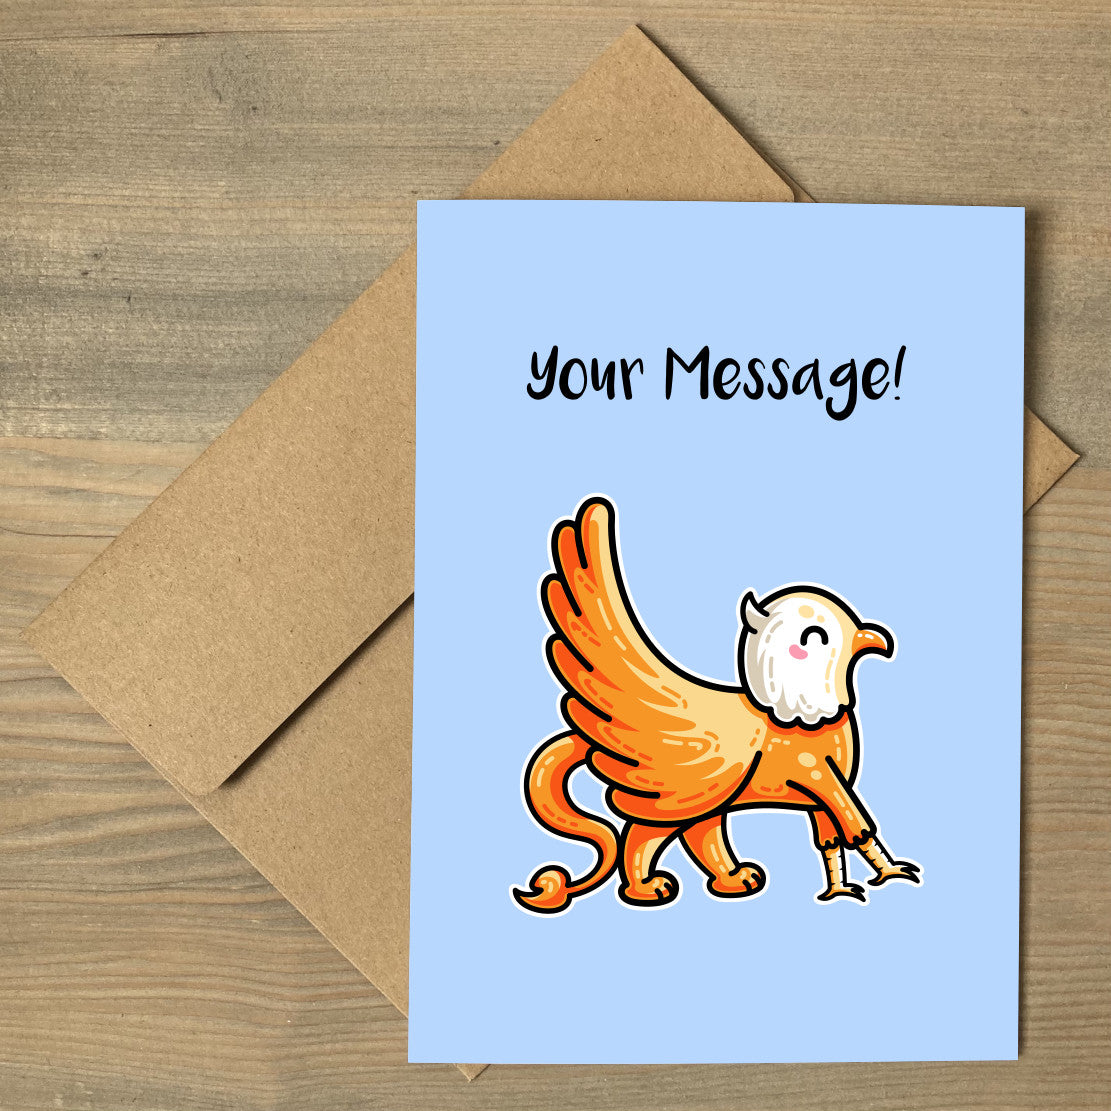 A blue greeting card lying flat on a brown envelope, with a design of a cute orange griffin walking to the right across the card, with personalised wording above